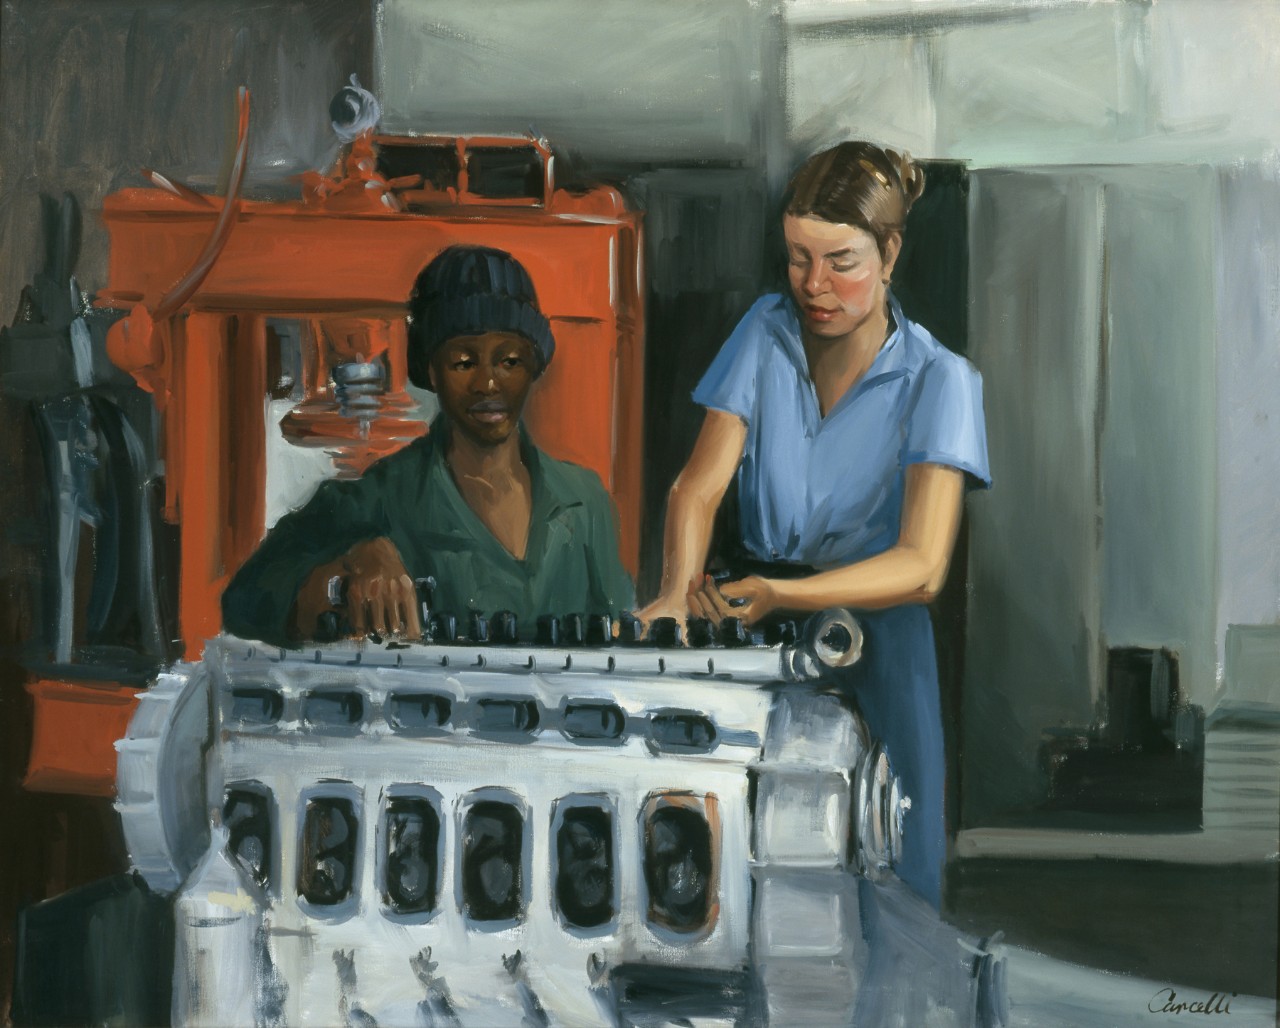 Two women stand in front of a small engine